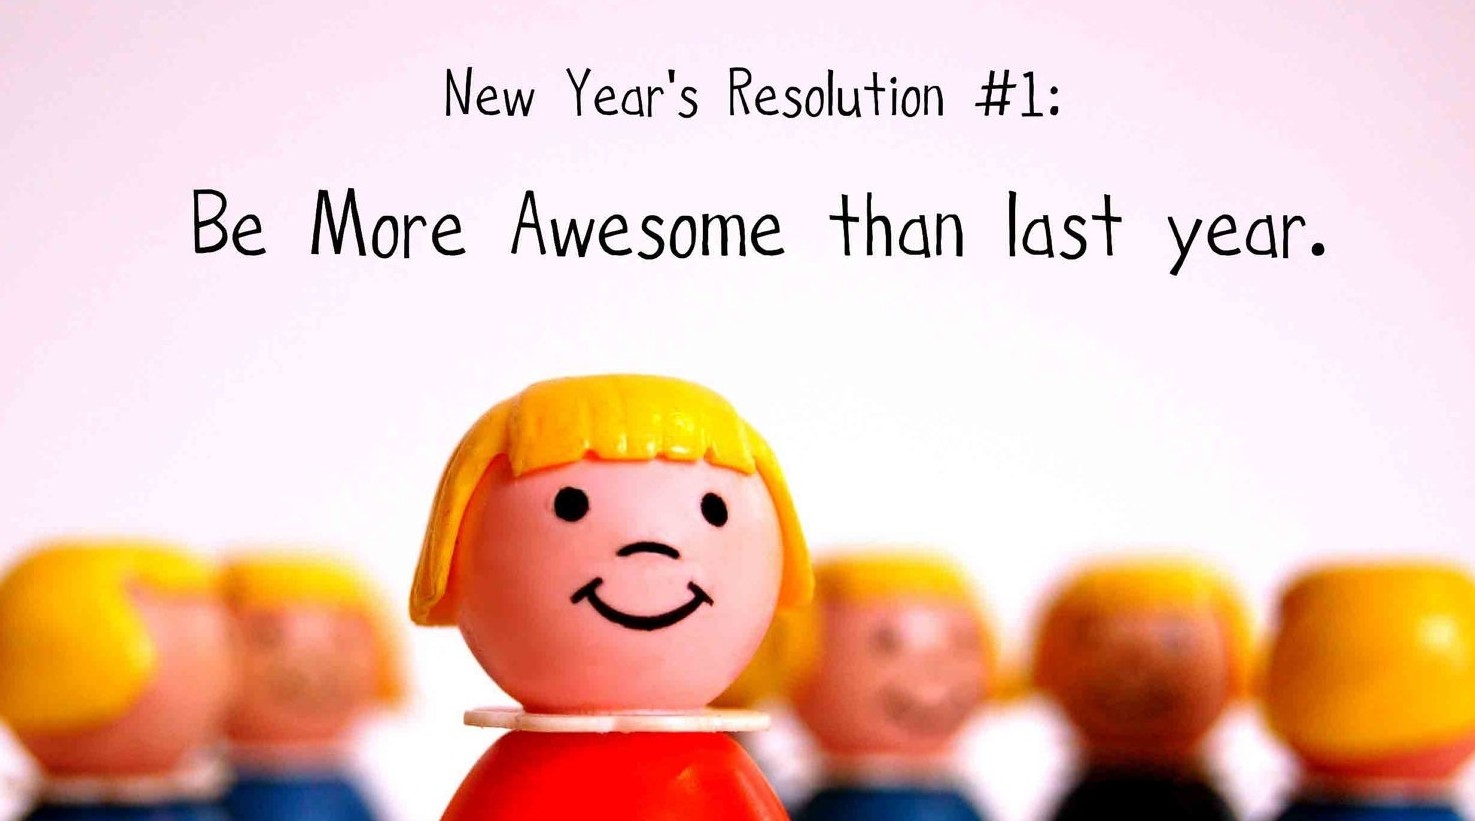 1662-New-Year-funny-resolution-2014-e1446657523734